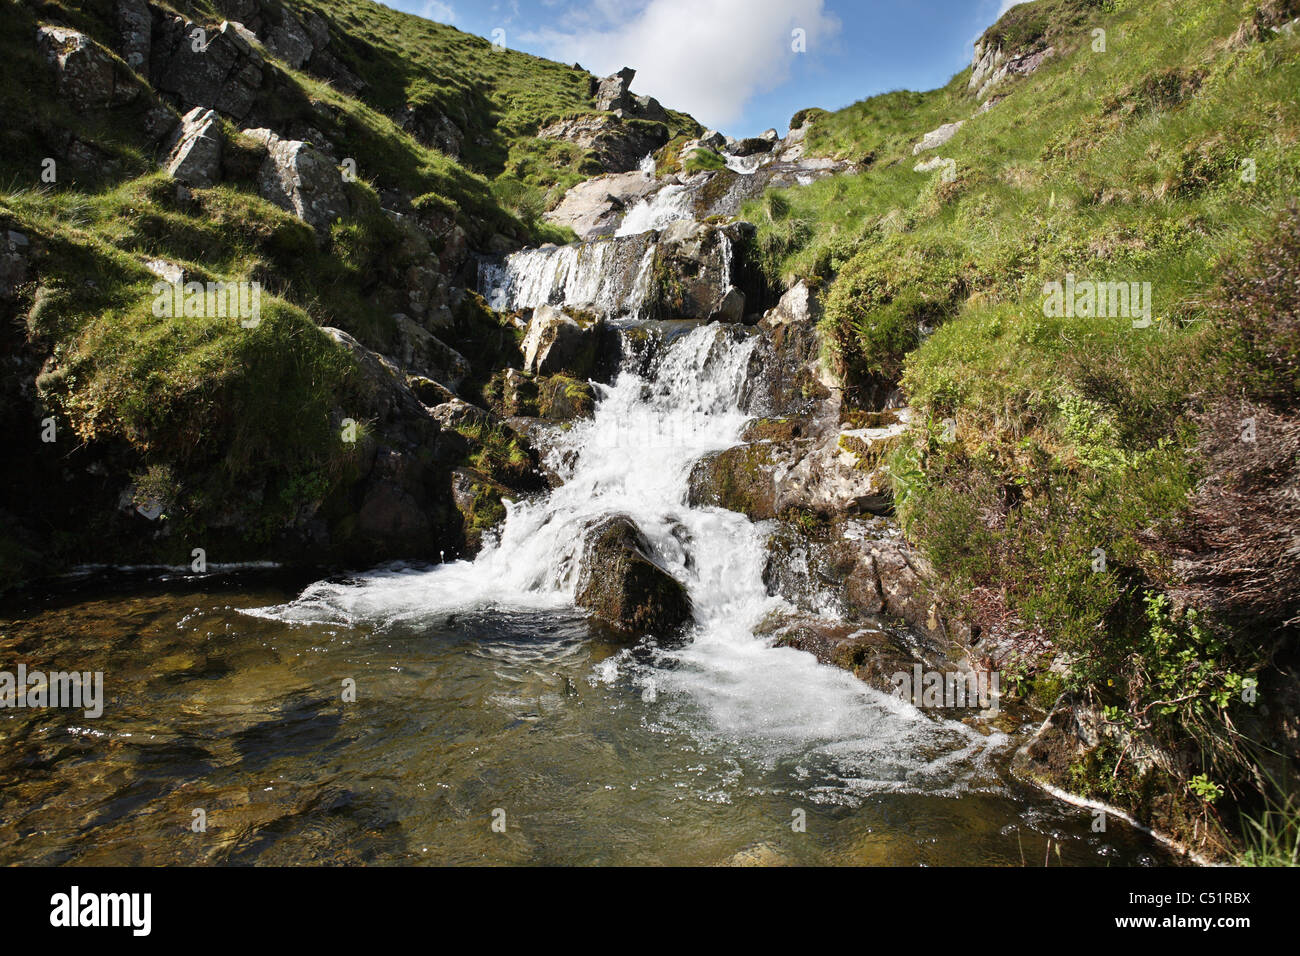 the-upper-reaches-of-cautley-spout-water